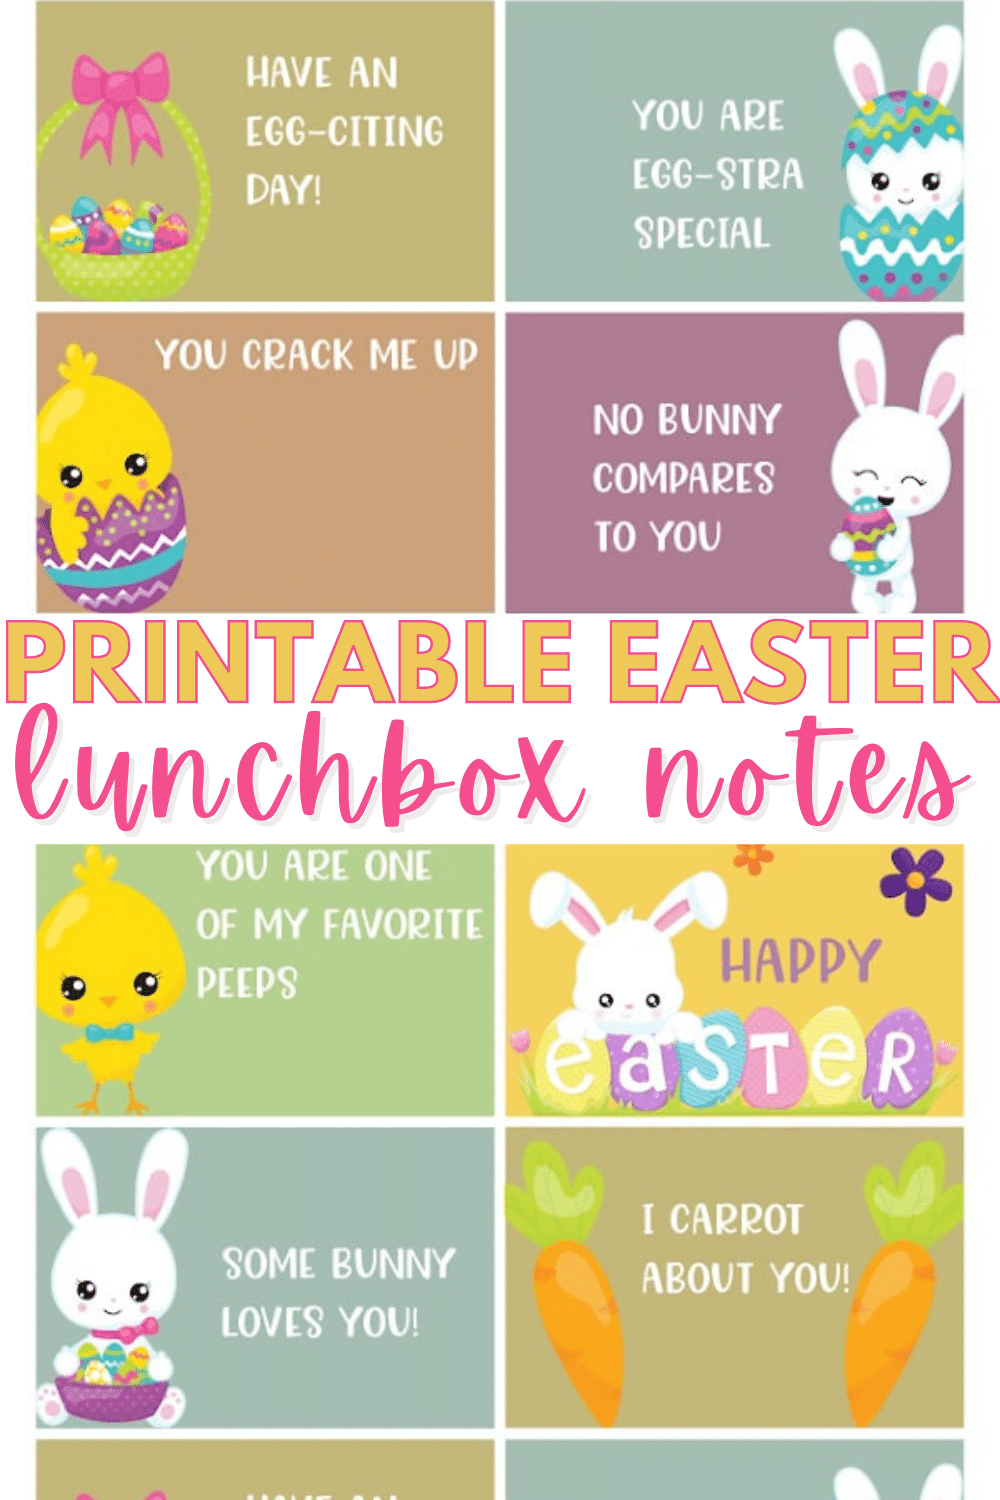 Free printable Easter lunchbox notes are the perfect way to brighten your child's day this spring. Add a printable lunchbox card to their lunch each day! #printables #easter #lunchboxnotes via @wondermomwannab